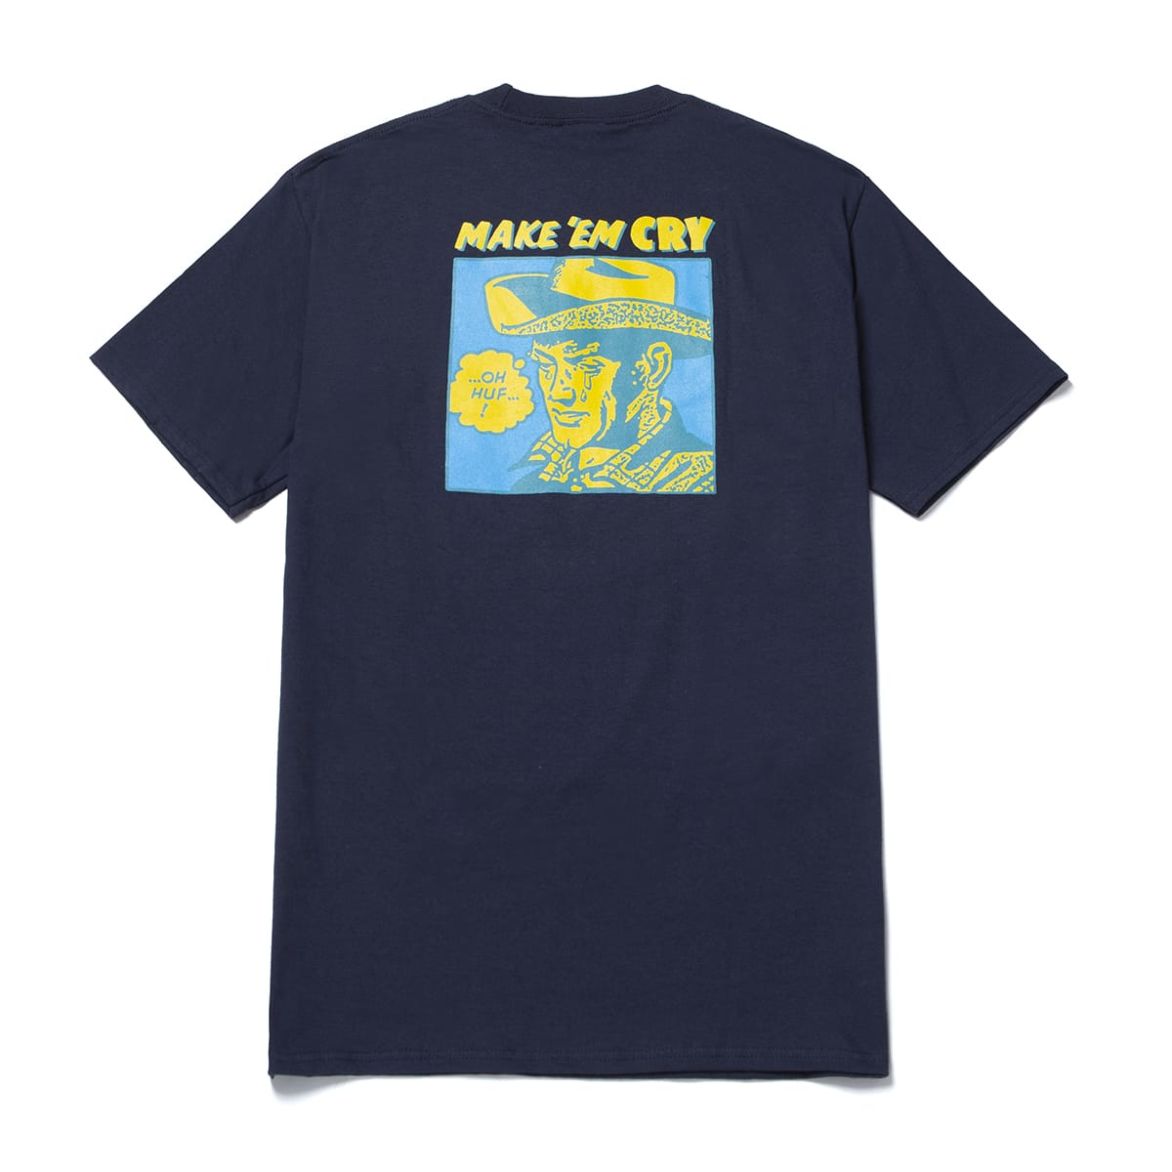 HUF - Make Em Cry Dude Men's Tee, French Navy